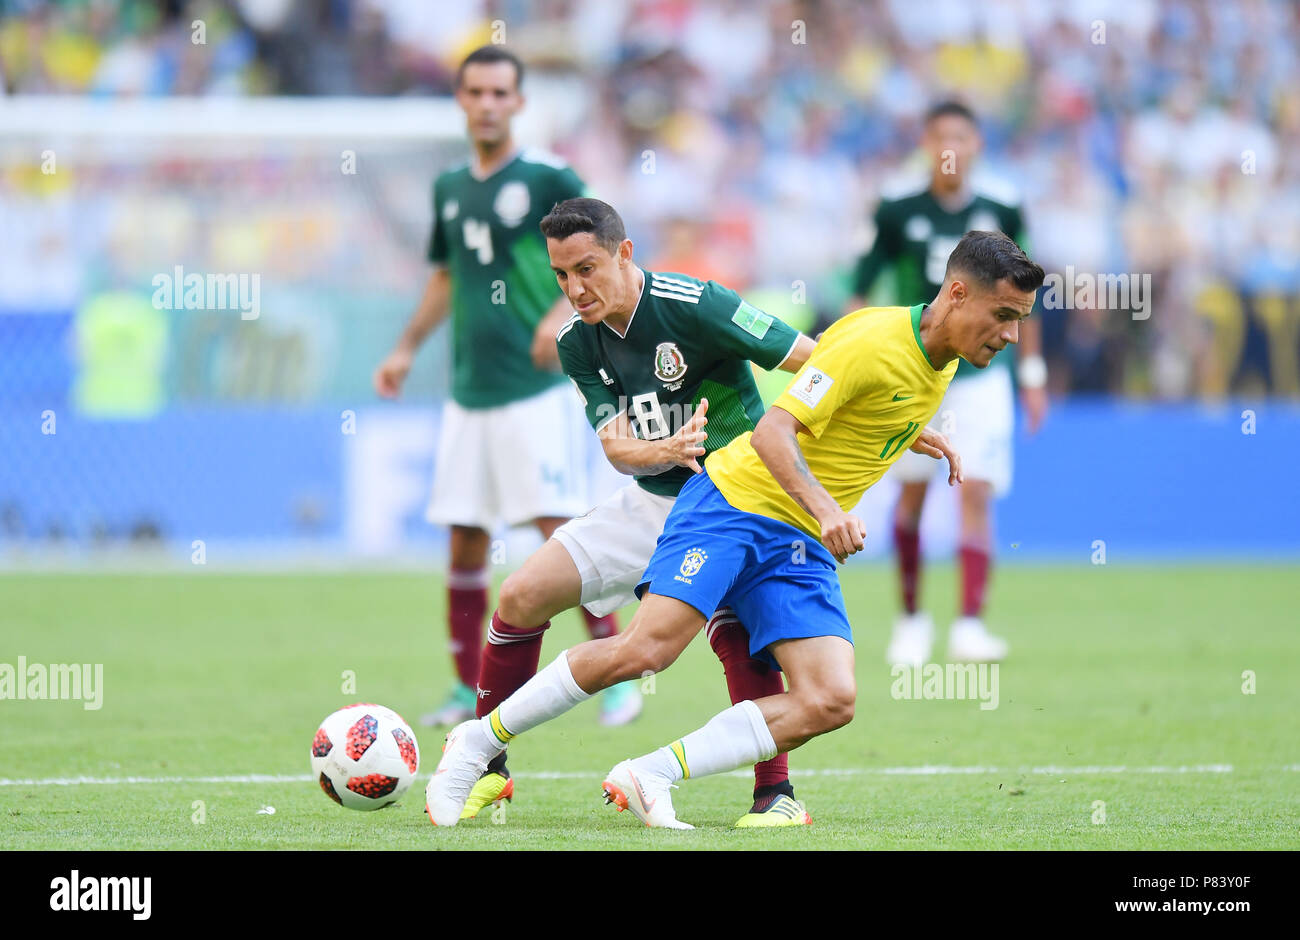 SAMARA, RUSSIA - JULY 02: Philippe Coutinho of Brazil competes with Andres Guardado of Mexico during the 2018 FIFA World Cup Russia Round of 16 match between Brazil and Mexico at Samara Arena on July 2, 2018 in Samara, Russia. (Photo by Lukasz Laskowski/PressFocus/MB Media) Stock Photo